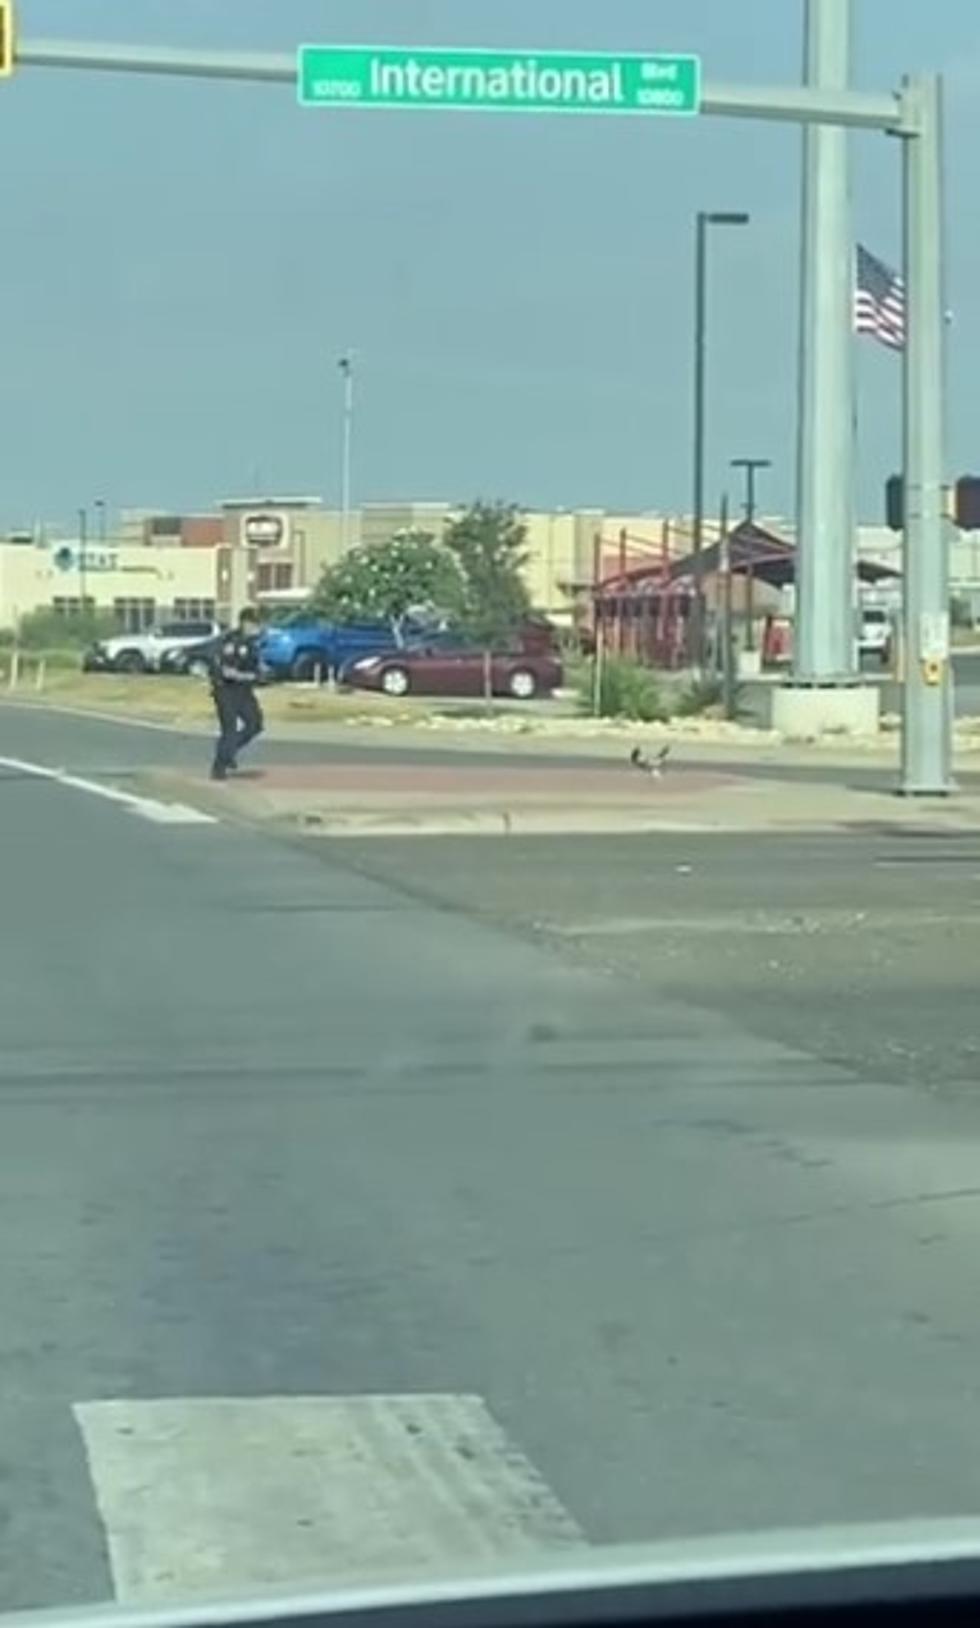 Why Did the Texas Chicken Cross the Road? To Run from the Police